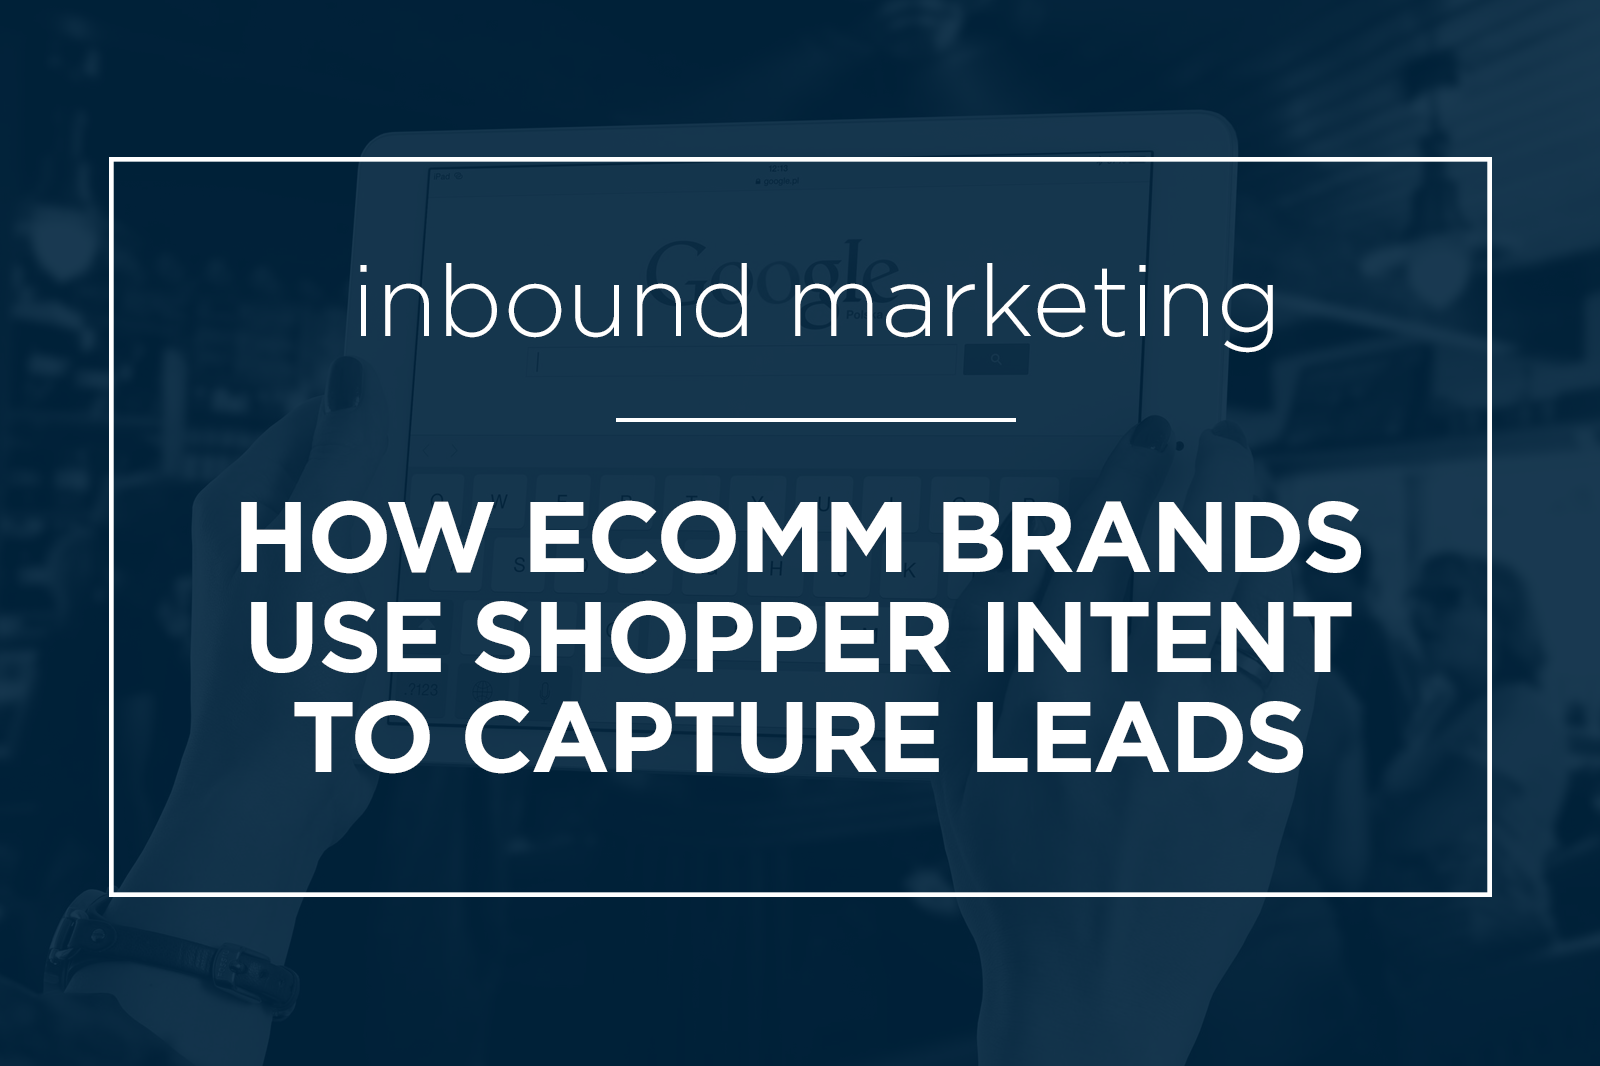 how-ecomm-brands-use-shopper-intent-to-capture-leads